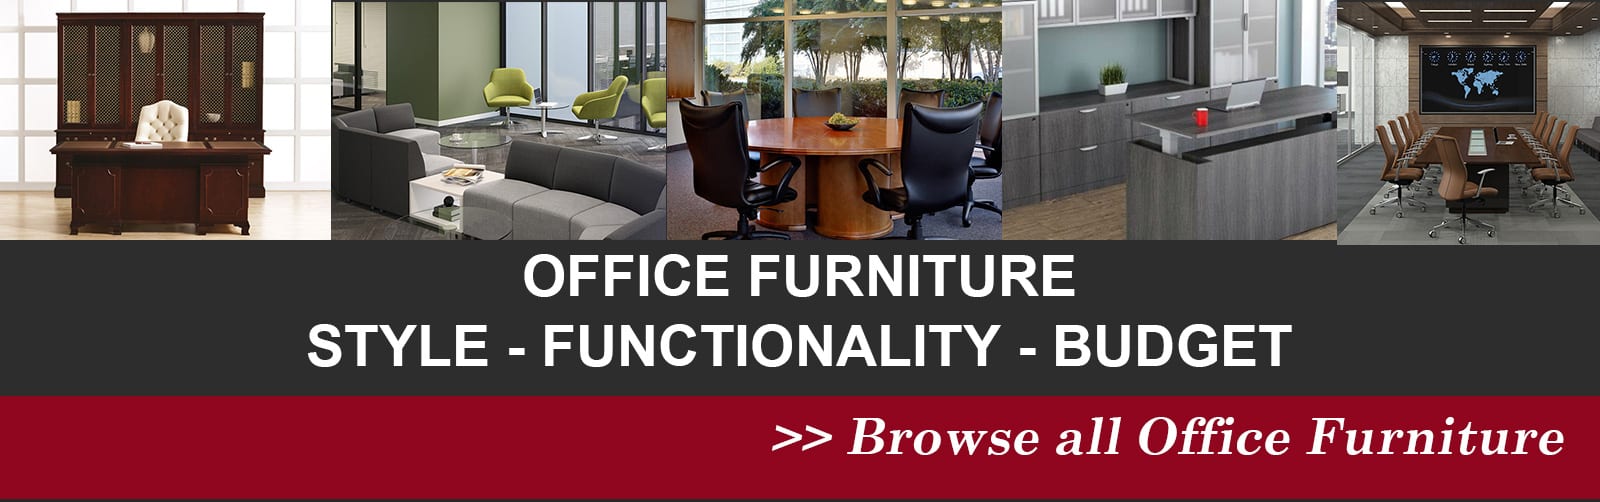 New & Used Office Furniture - Office Furniture Warehouse